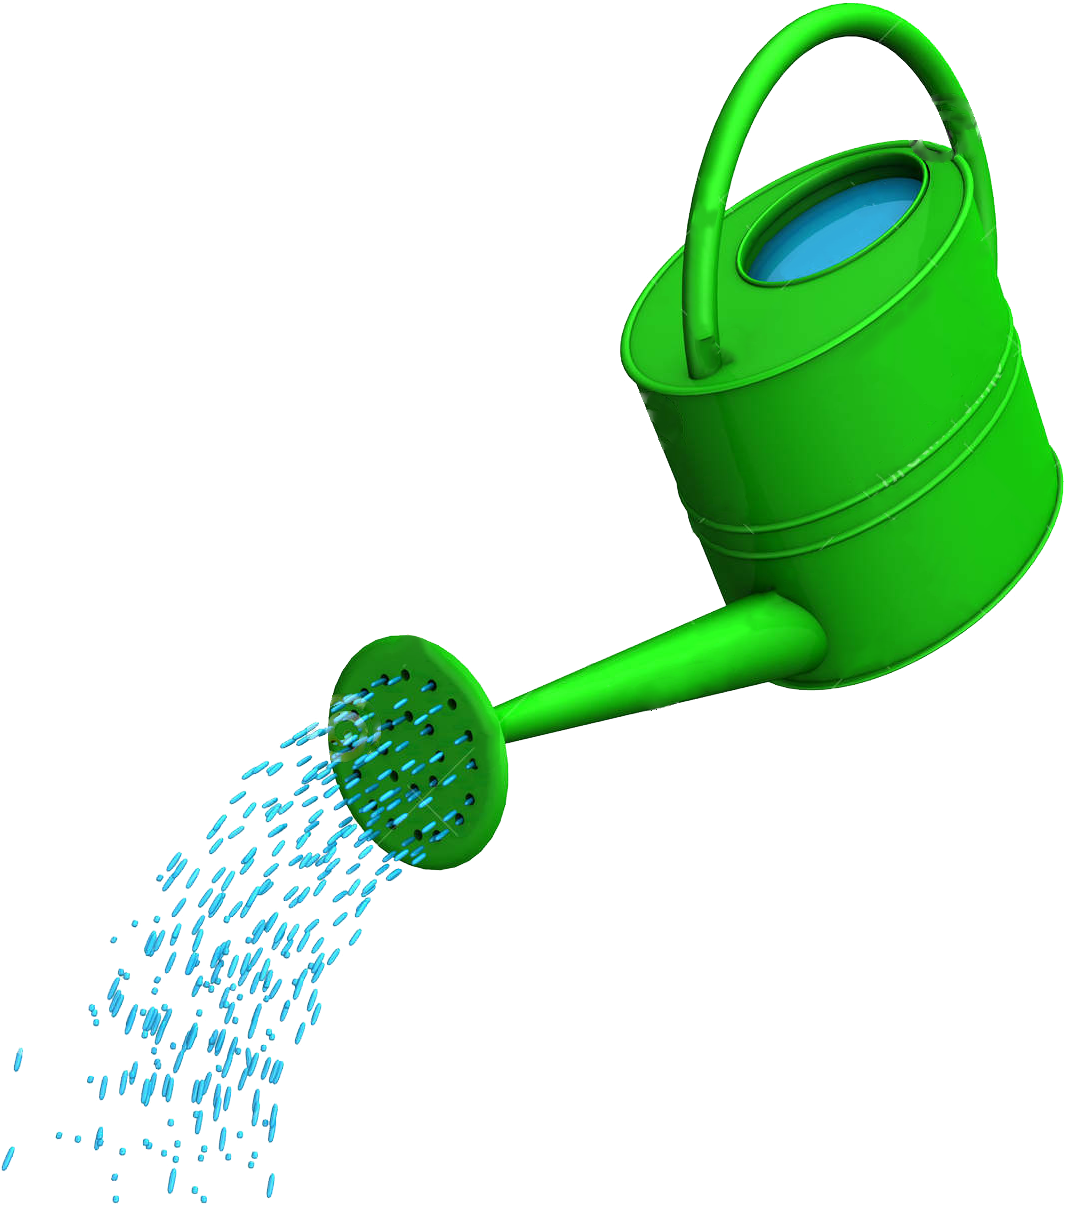 Watering Can W Q0bqg - Water In A Watering Can (1300x1285)